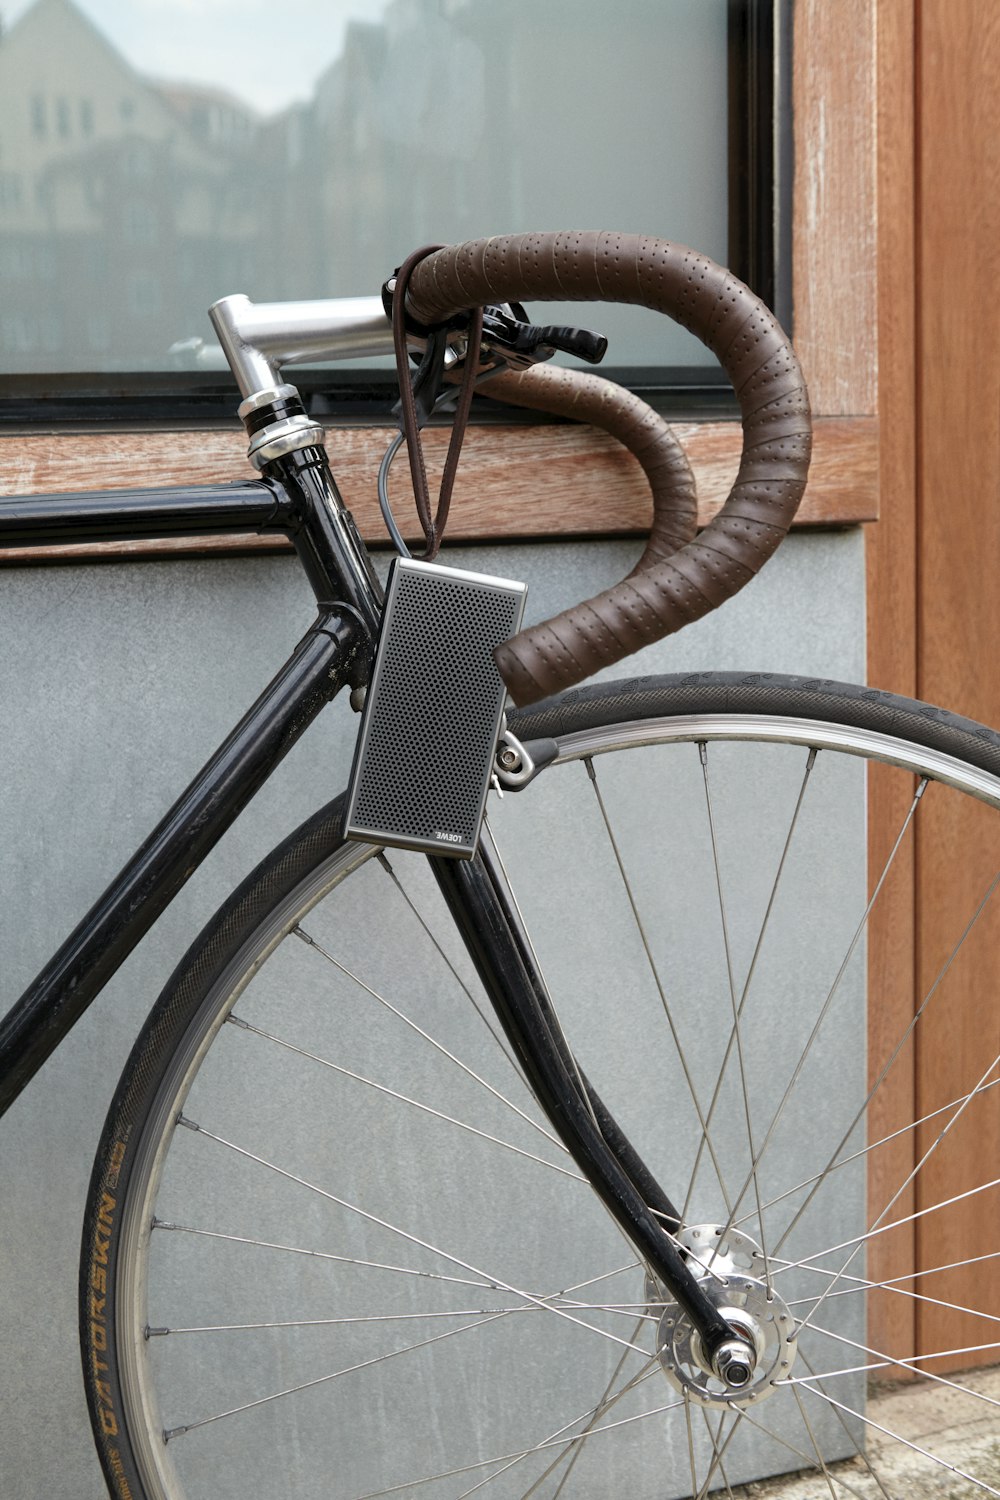 gray and black road bike leaning on brown and gray concrete wall